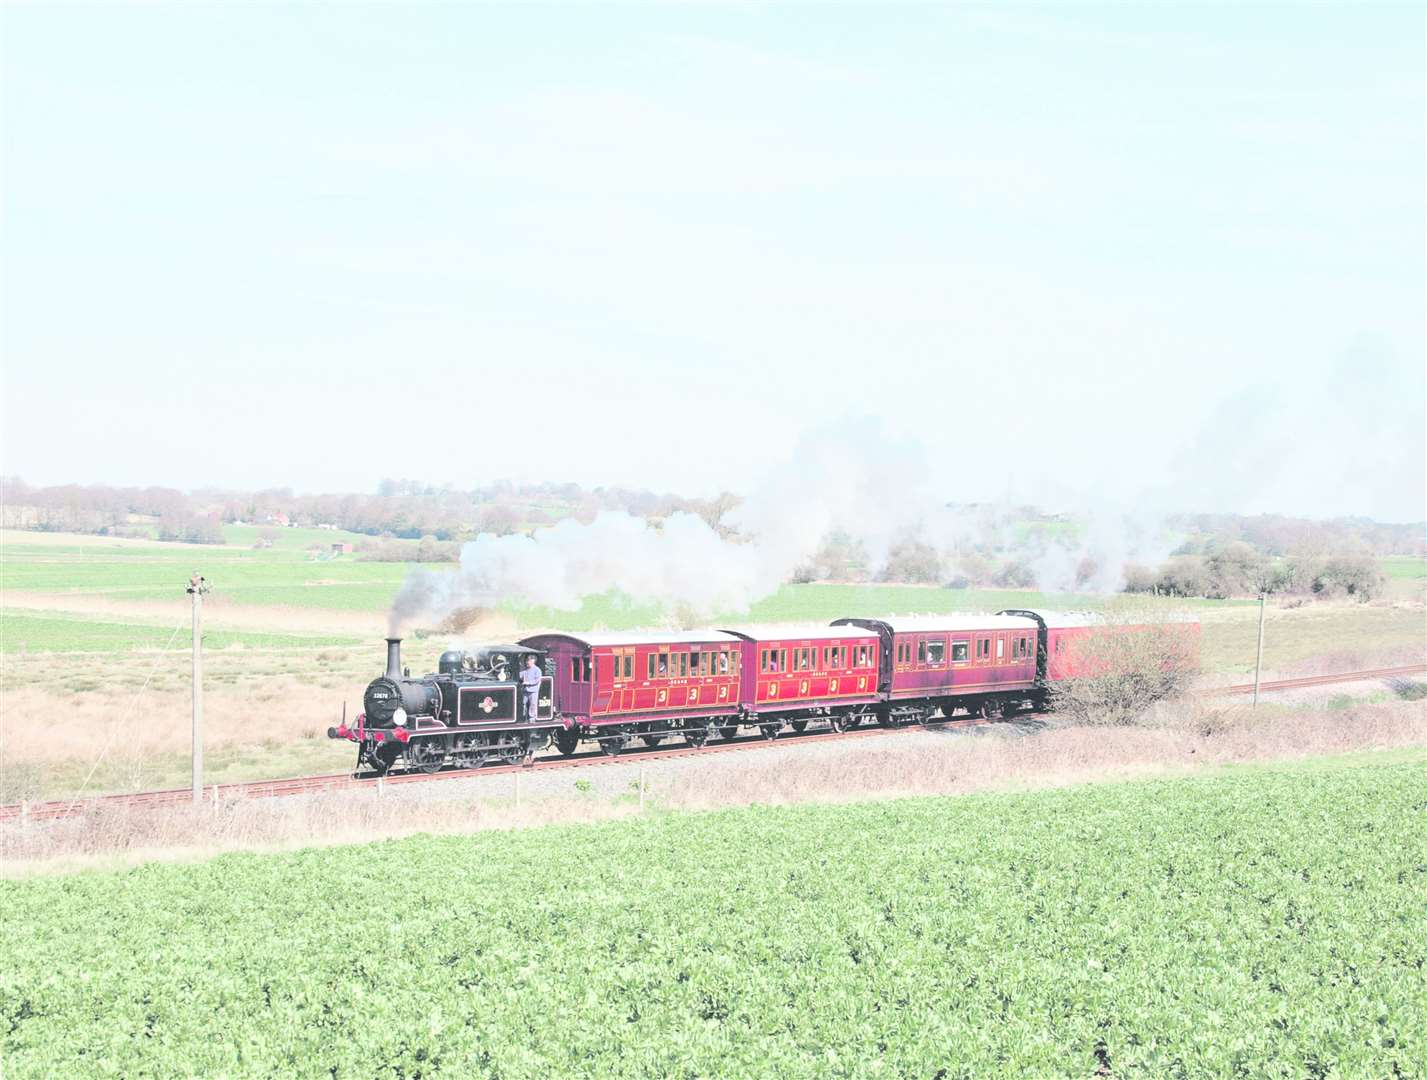 The Kent and East Sussex Railway is preparing for seasonal events in the coming months